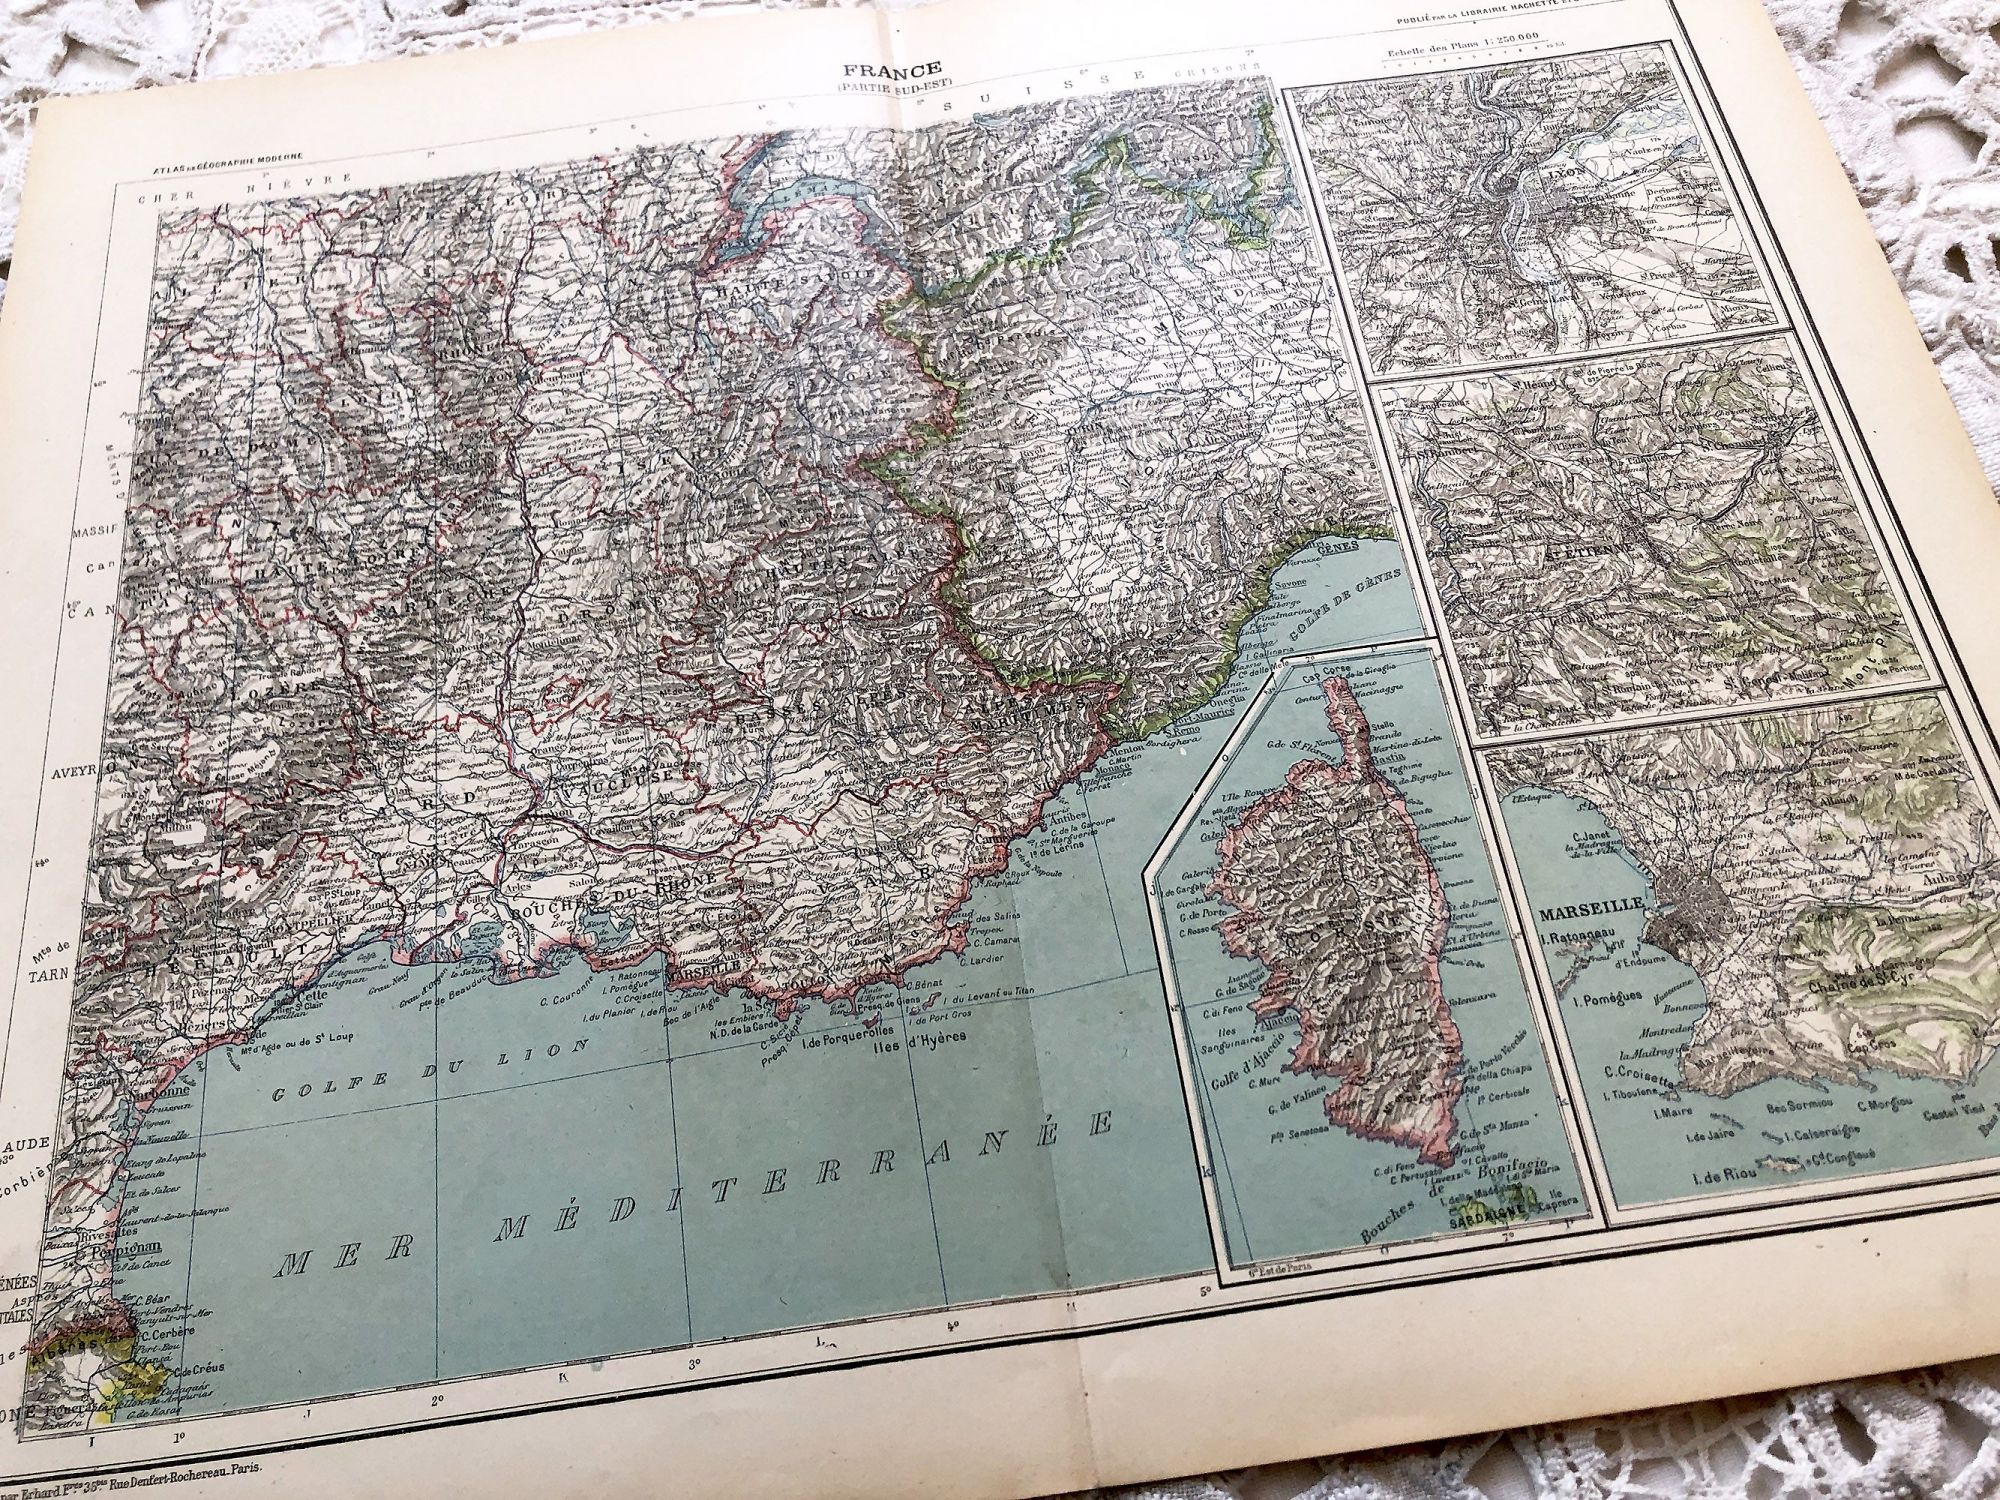 Large vintage map of south-east of France, Corsica, and the cities of Marseille, Lyon from a French atlas of the 1910s